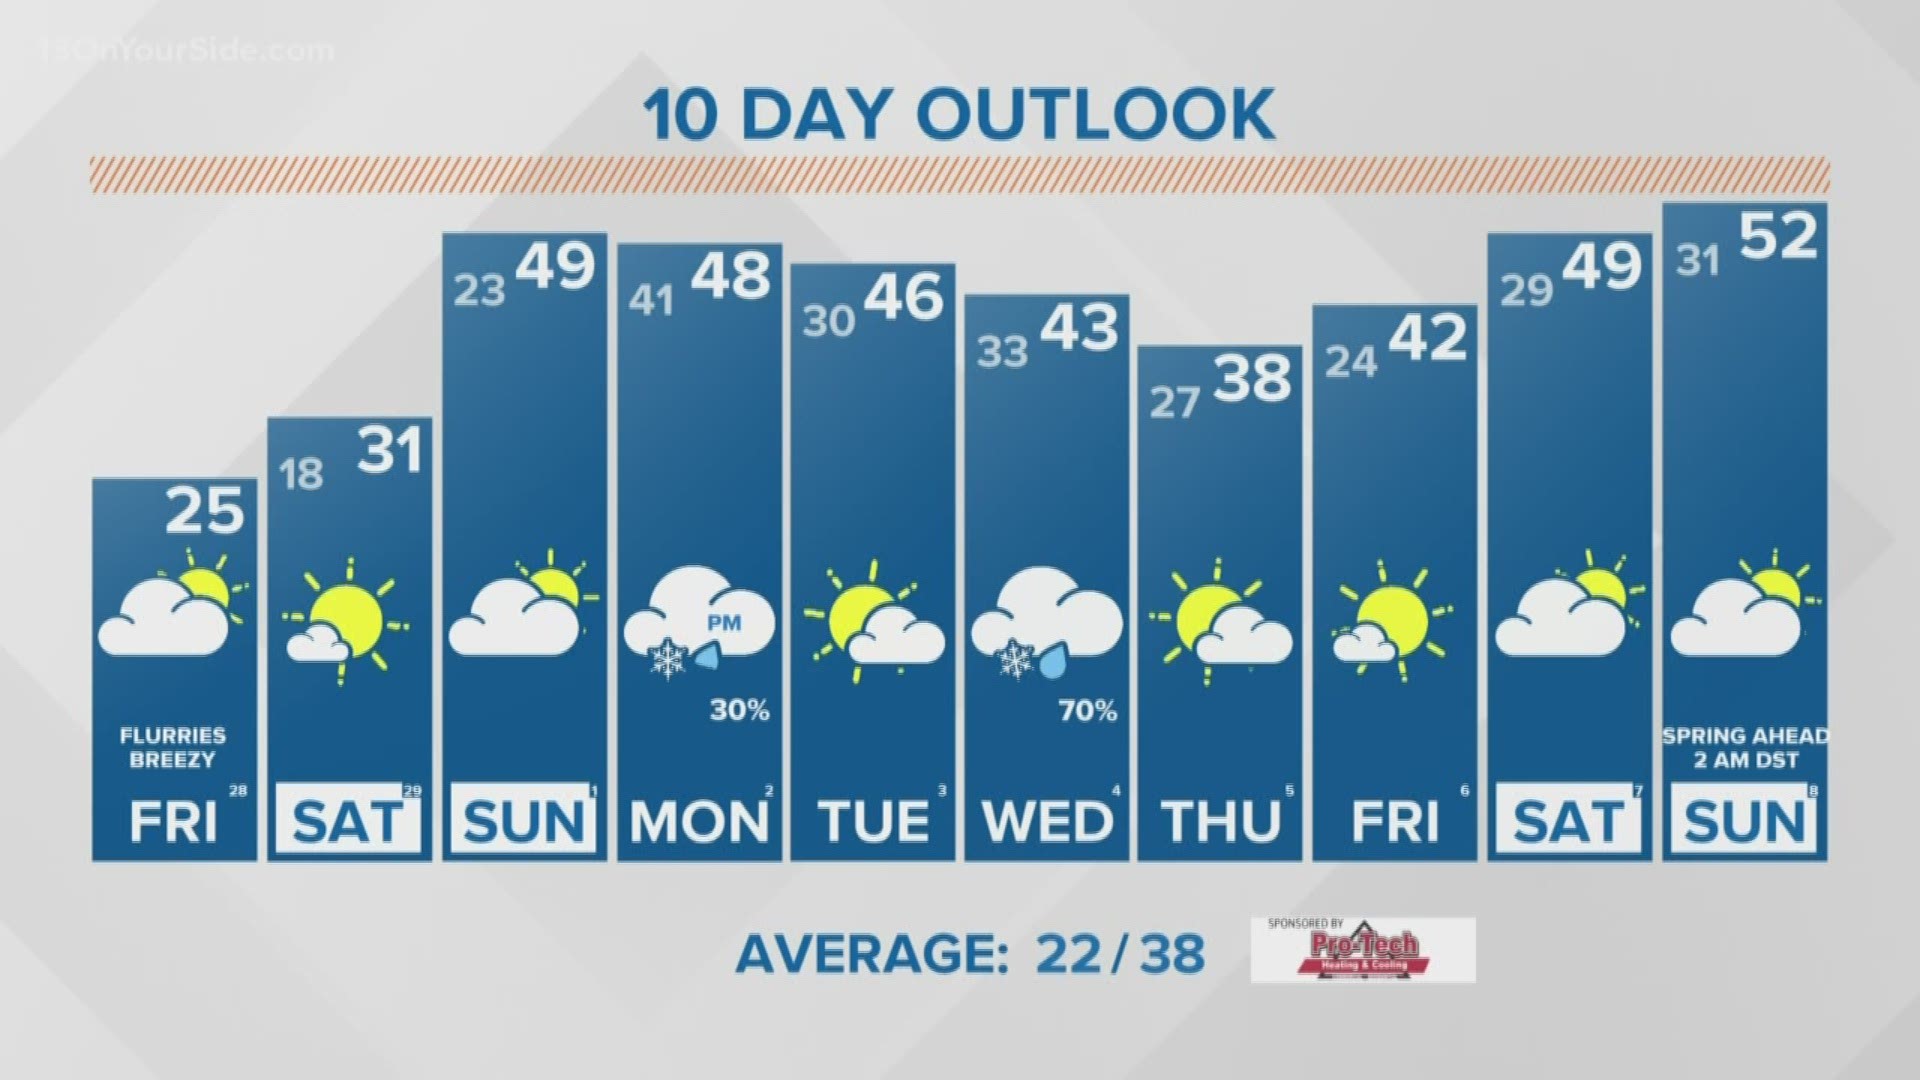 Sub-freezing temperatures continue Friday and Saturday, but leap to the upper 40s on Sunday.